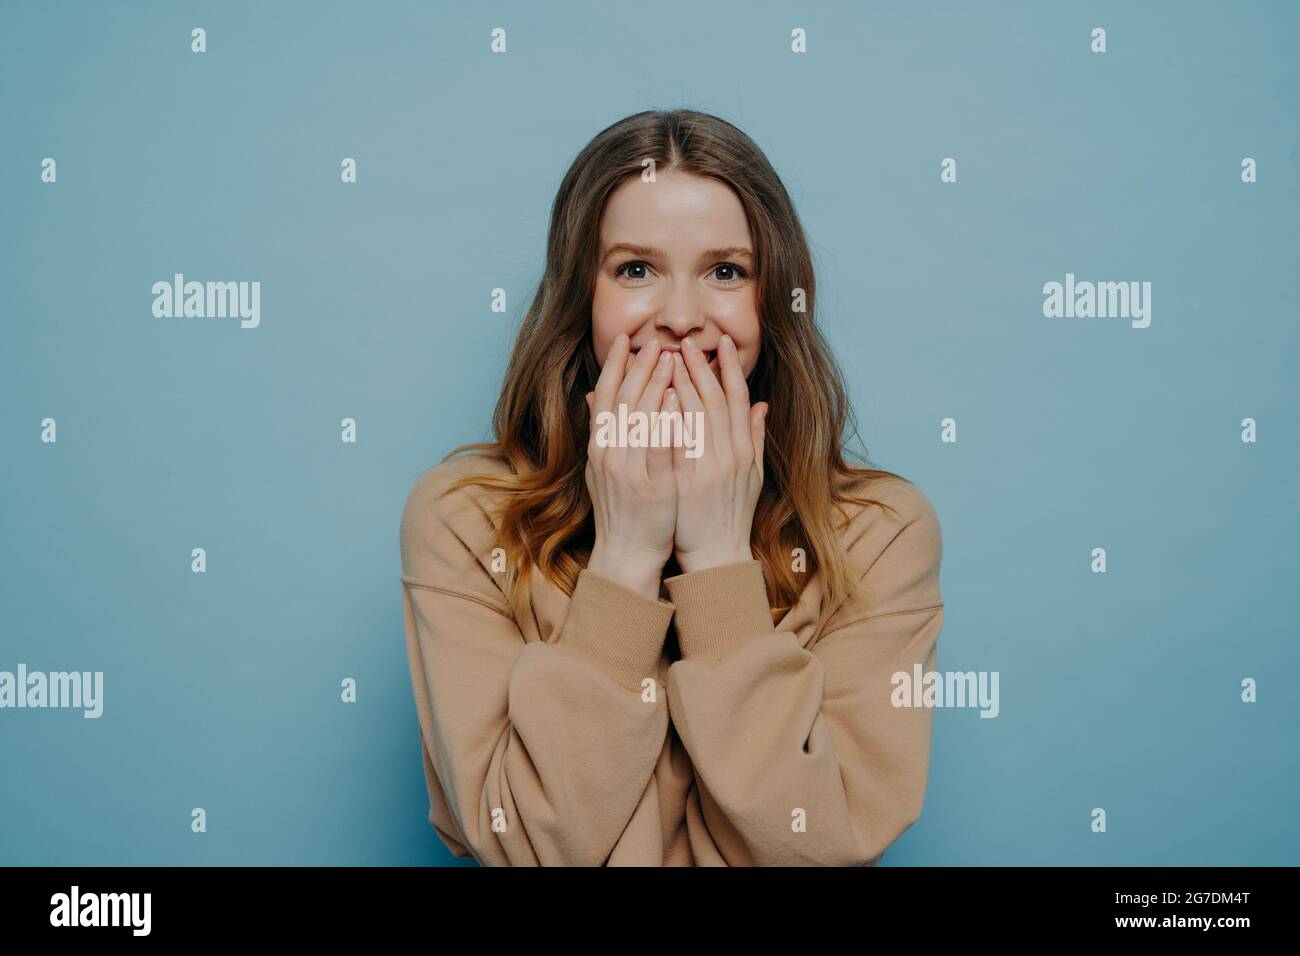 Surprised teenage girl covering mouth with hands Stock Photo